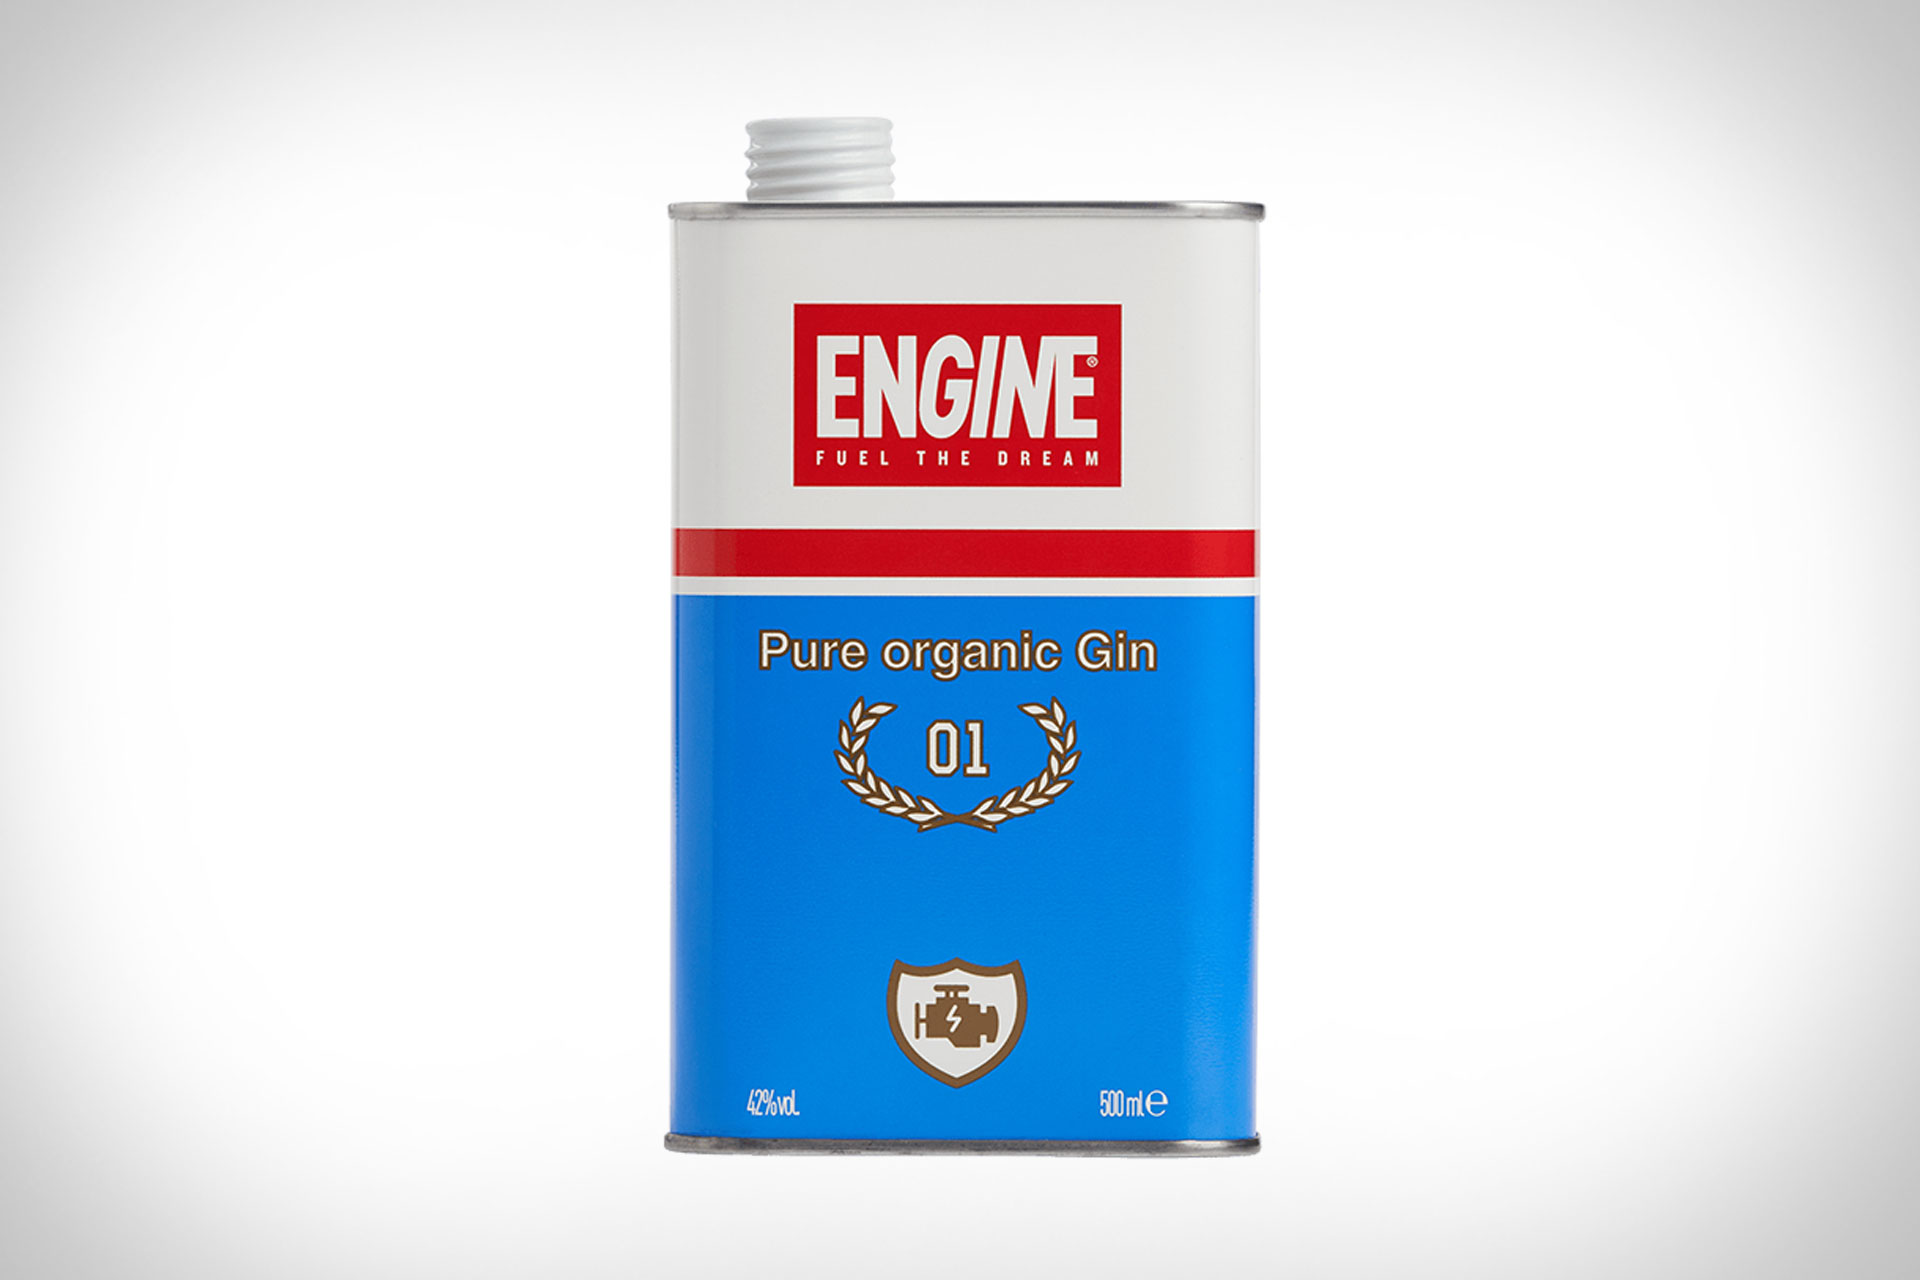 Engine Gin | Uncrate